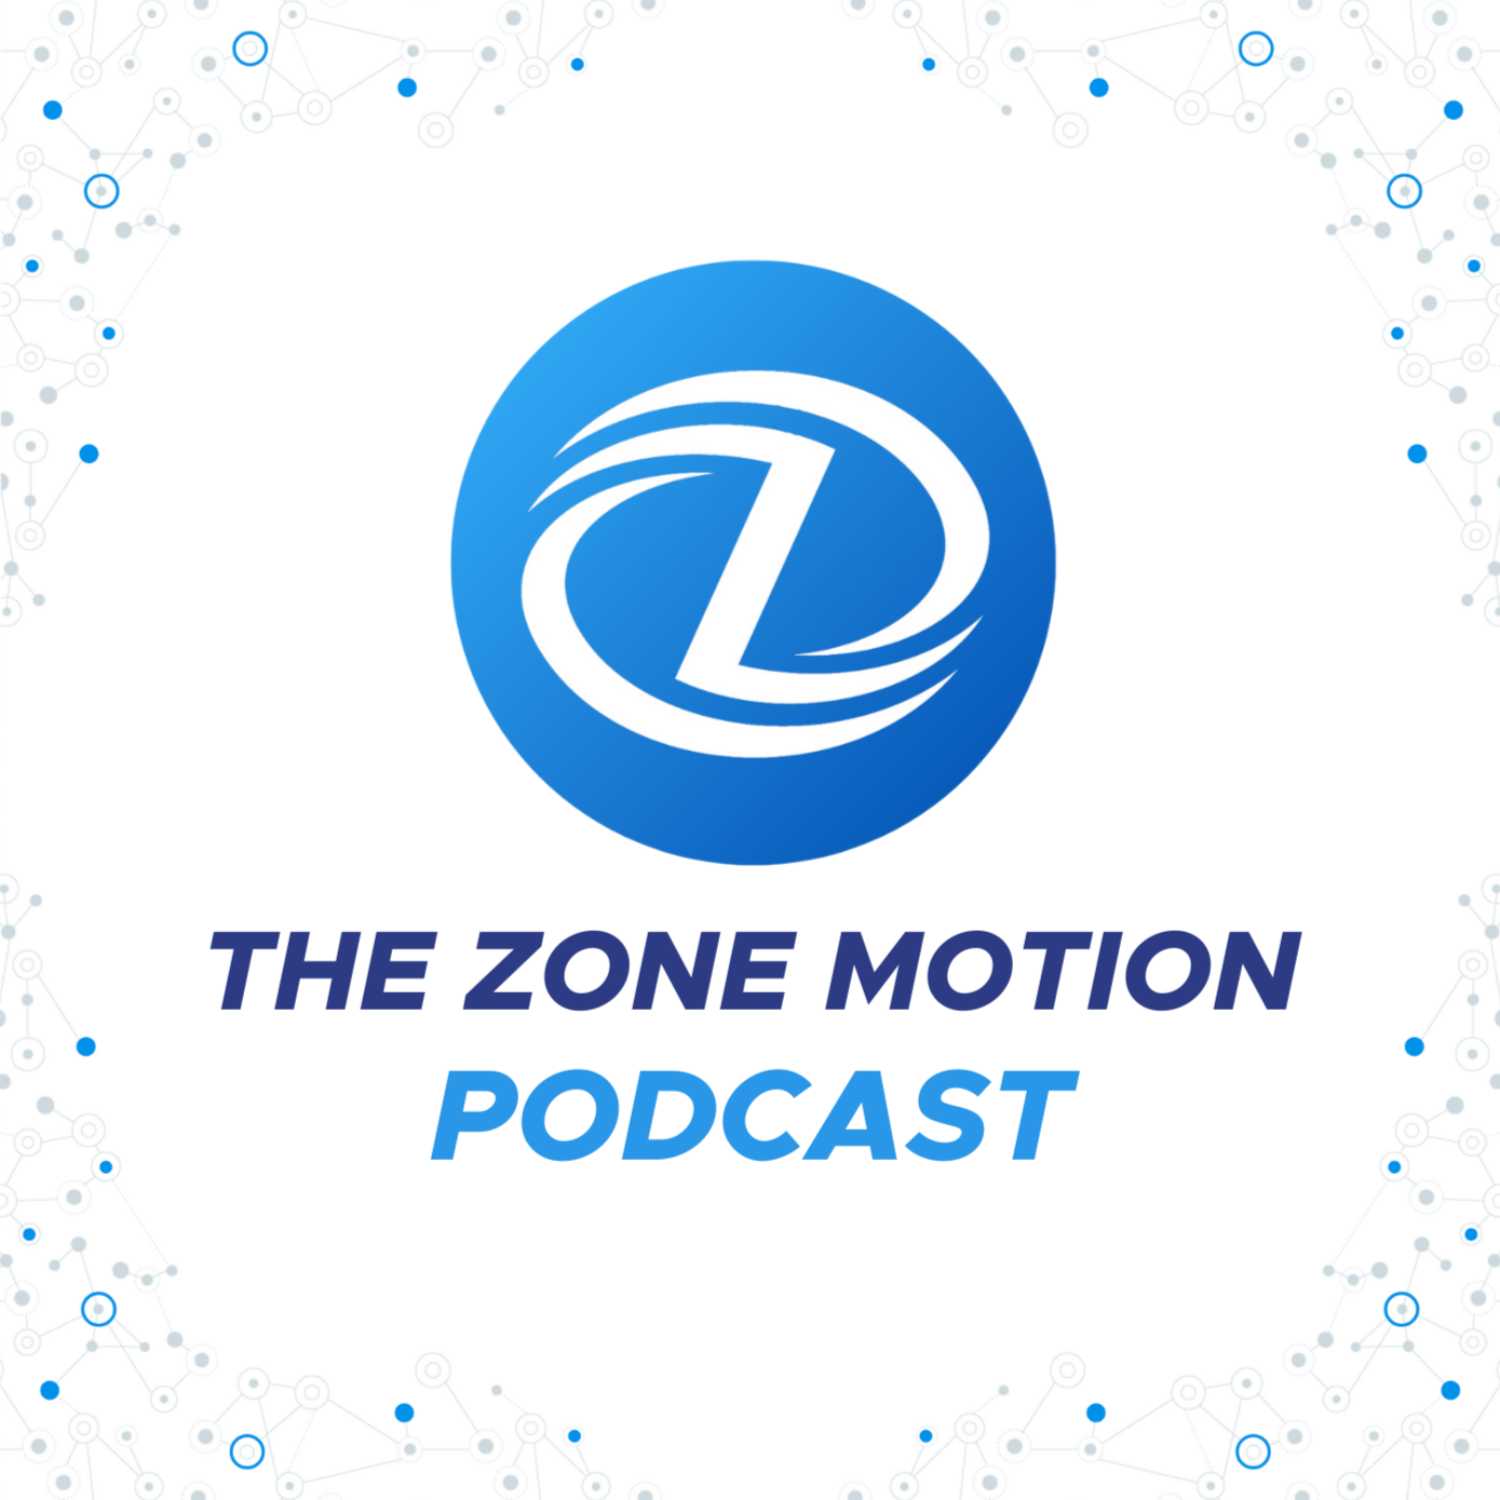 The Zone Motion Podcast